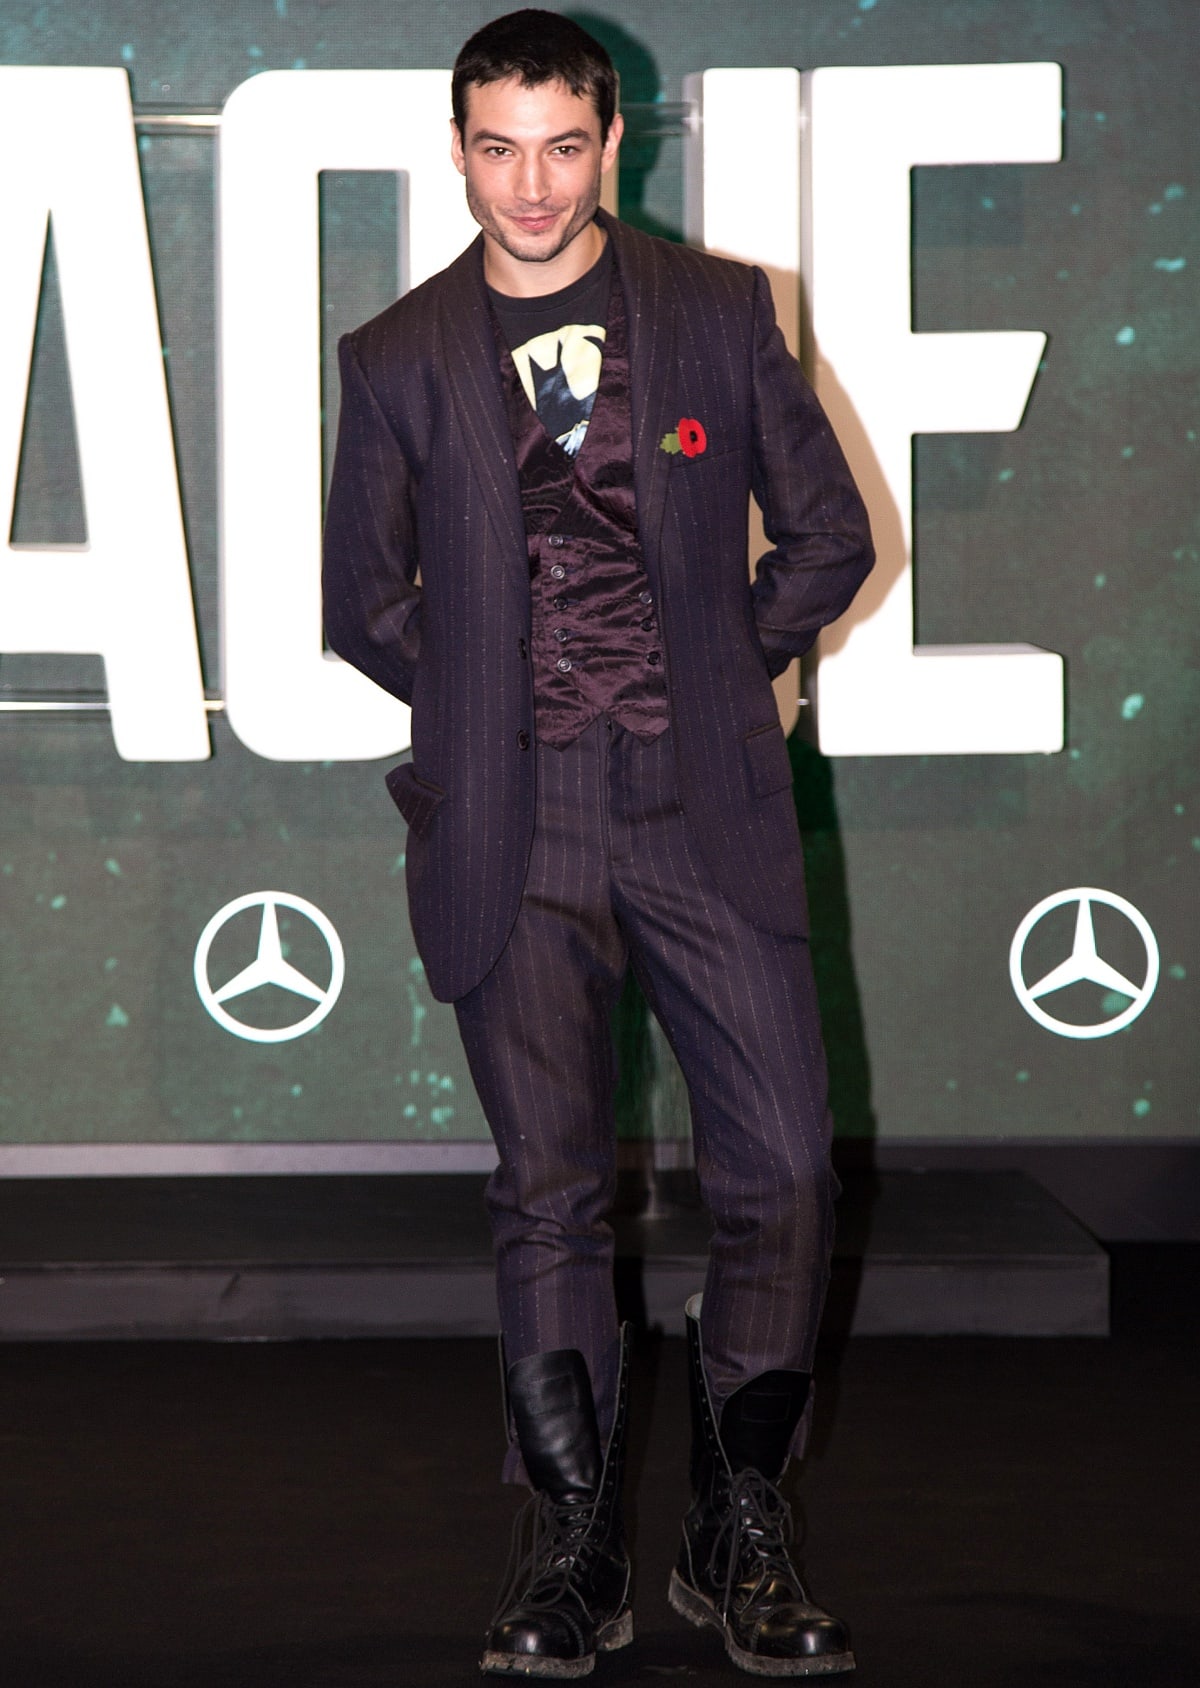 Ezra Miller attending the Justice League photocall